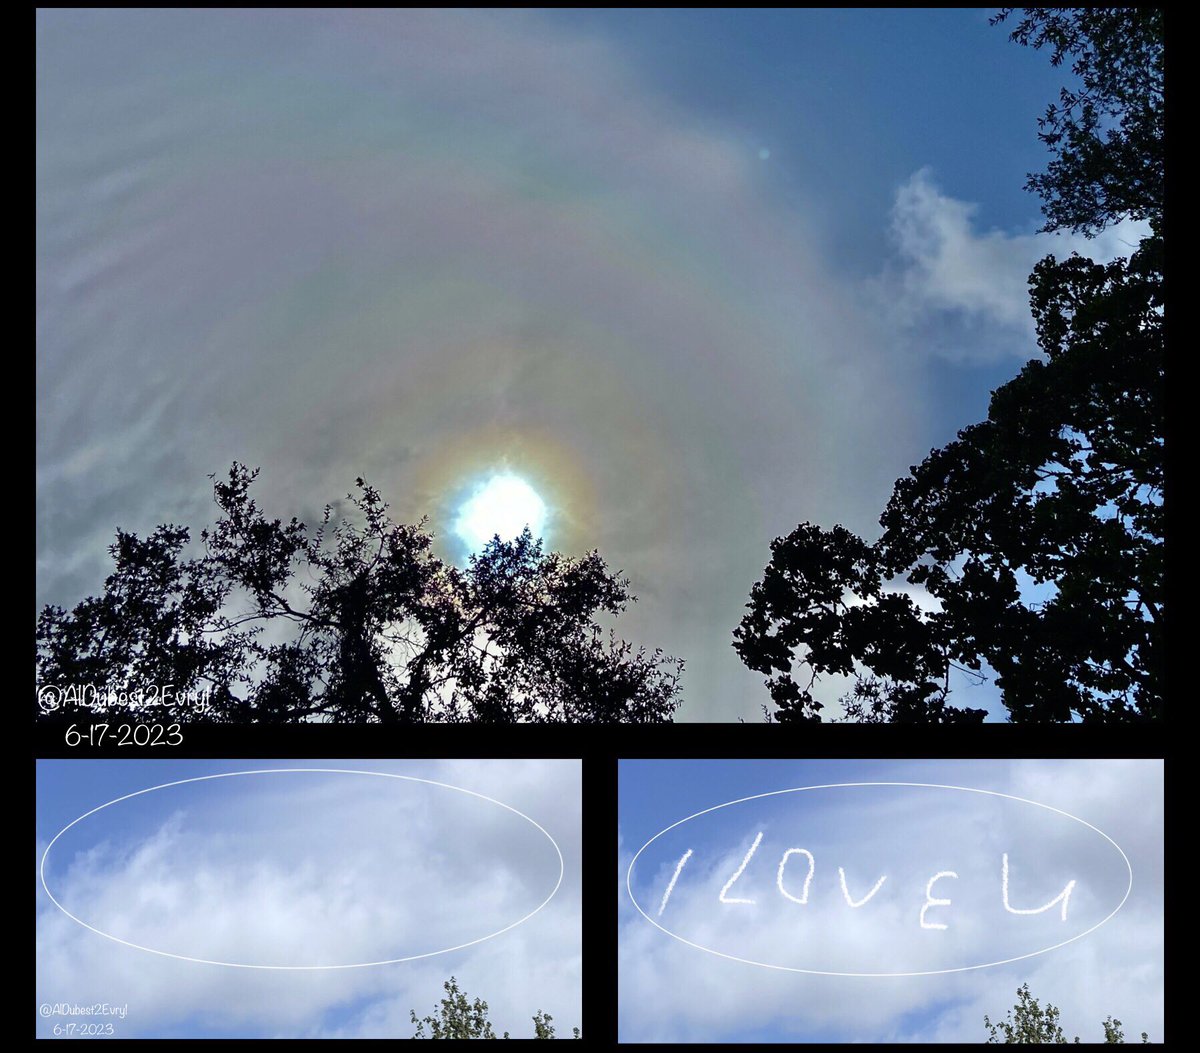 🌈☀️ “I LOVE U” clouds

20 minutes ago
#ThingsUnseen #Godwink #Godwinks #LoveLetter #sky #cloud #YourKingdomCome #rainbow #sun #YouAreLoved 
Good Saturday #SaturdayMorning #iridescence John 15:9

Jesus: “As the Father has loved me, so have I loved you. Now remain in my love.”